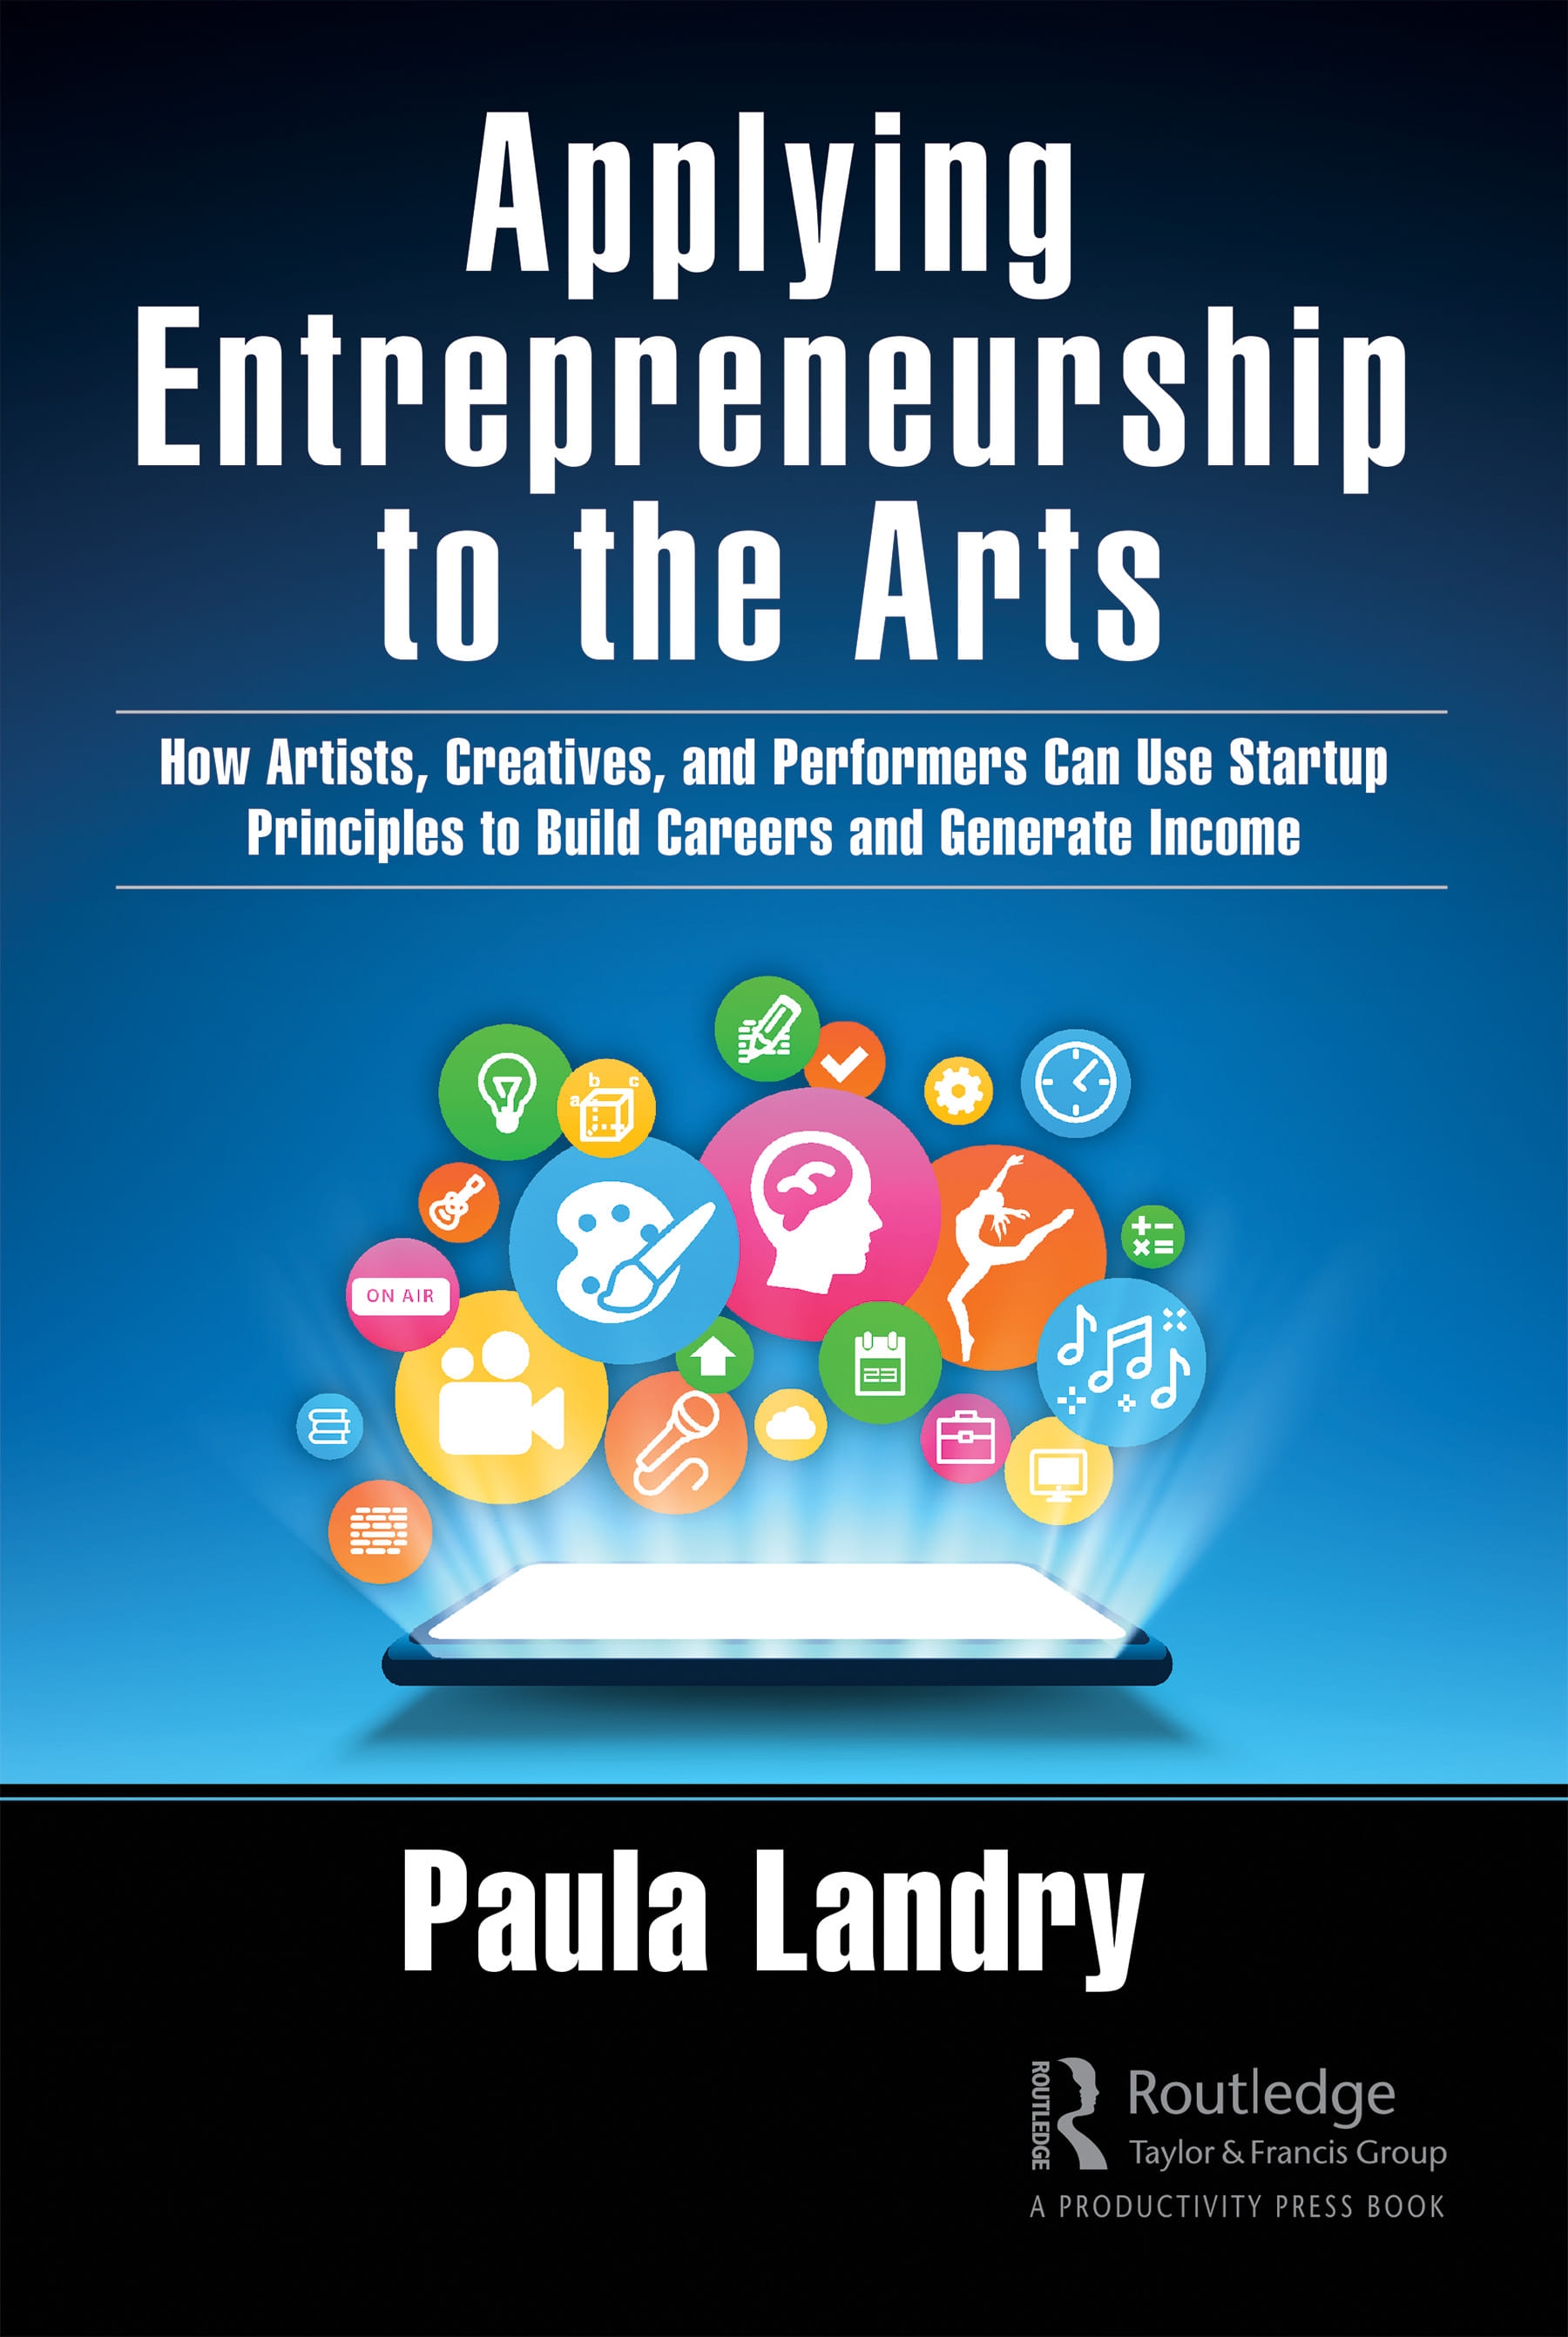 Applying Entrepreneurship to the Arts: How Artists, Creatives, and Performers Can Use Start-Up Principles to Build Careers and Generate Income